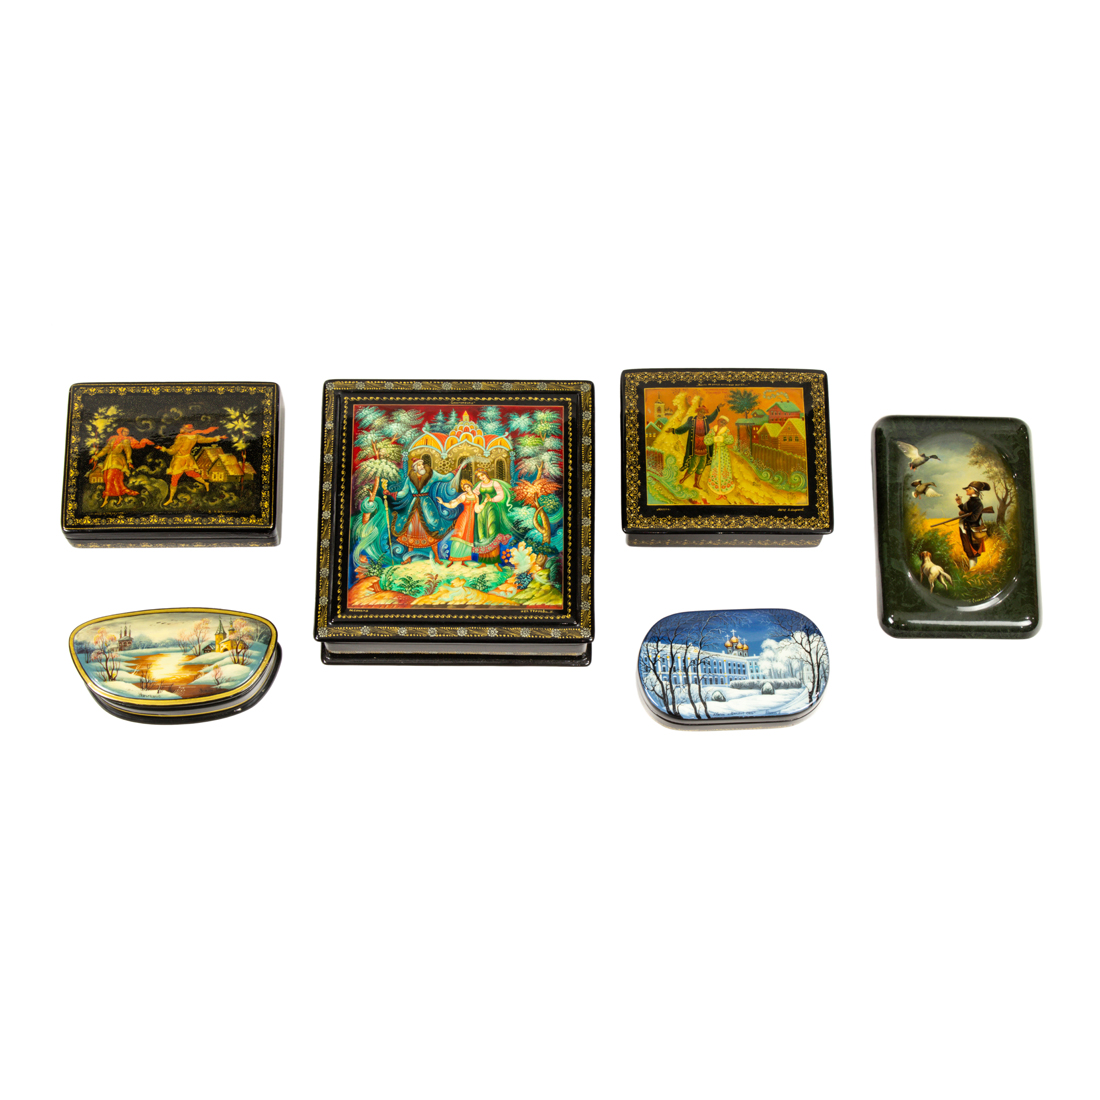  LOT OF 6 RUSSIAN LACQUER BOXES 2d176b